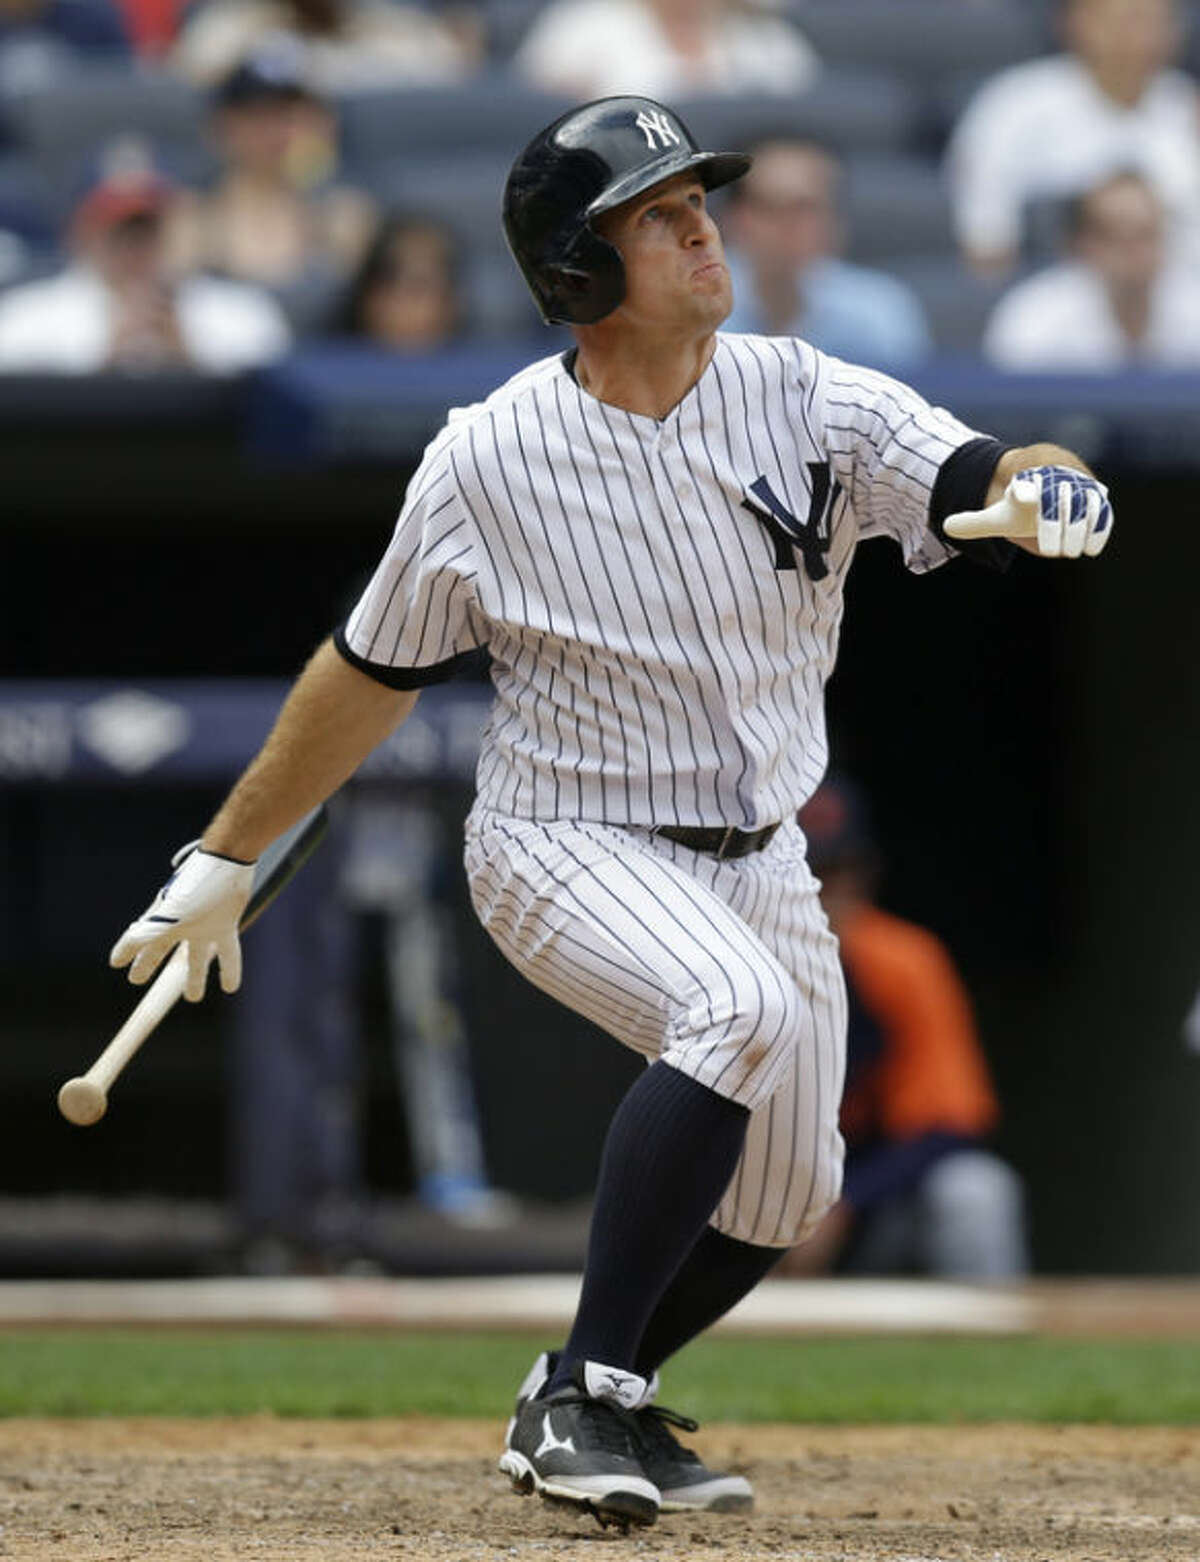 New York Yankees' Brett Gardner watches his ninth-inning solo home run off Detroit Tigers relief pitcher Jose Veras in a baseball game on Sunday, Aug. 11, 2013, in New York. The Yankees won 5-4. (AP Photo/Kathy Willens)